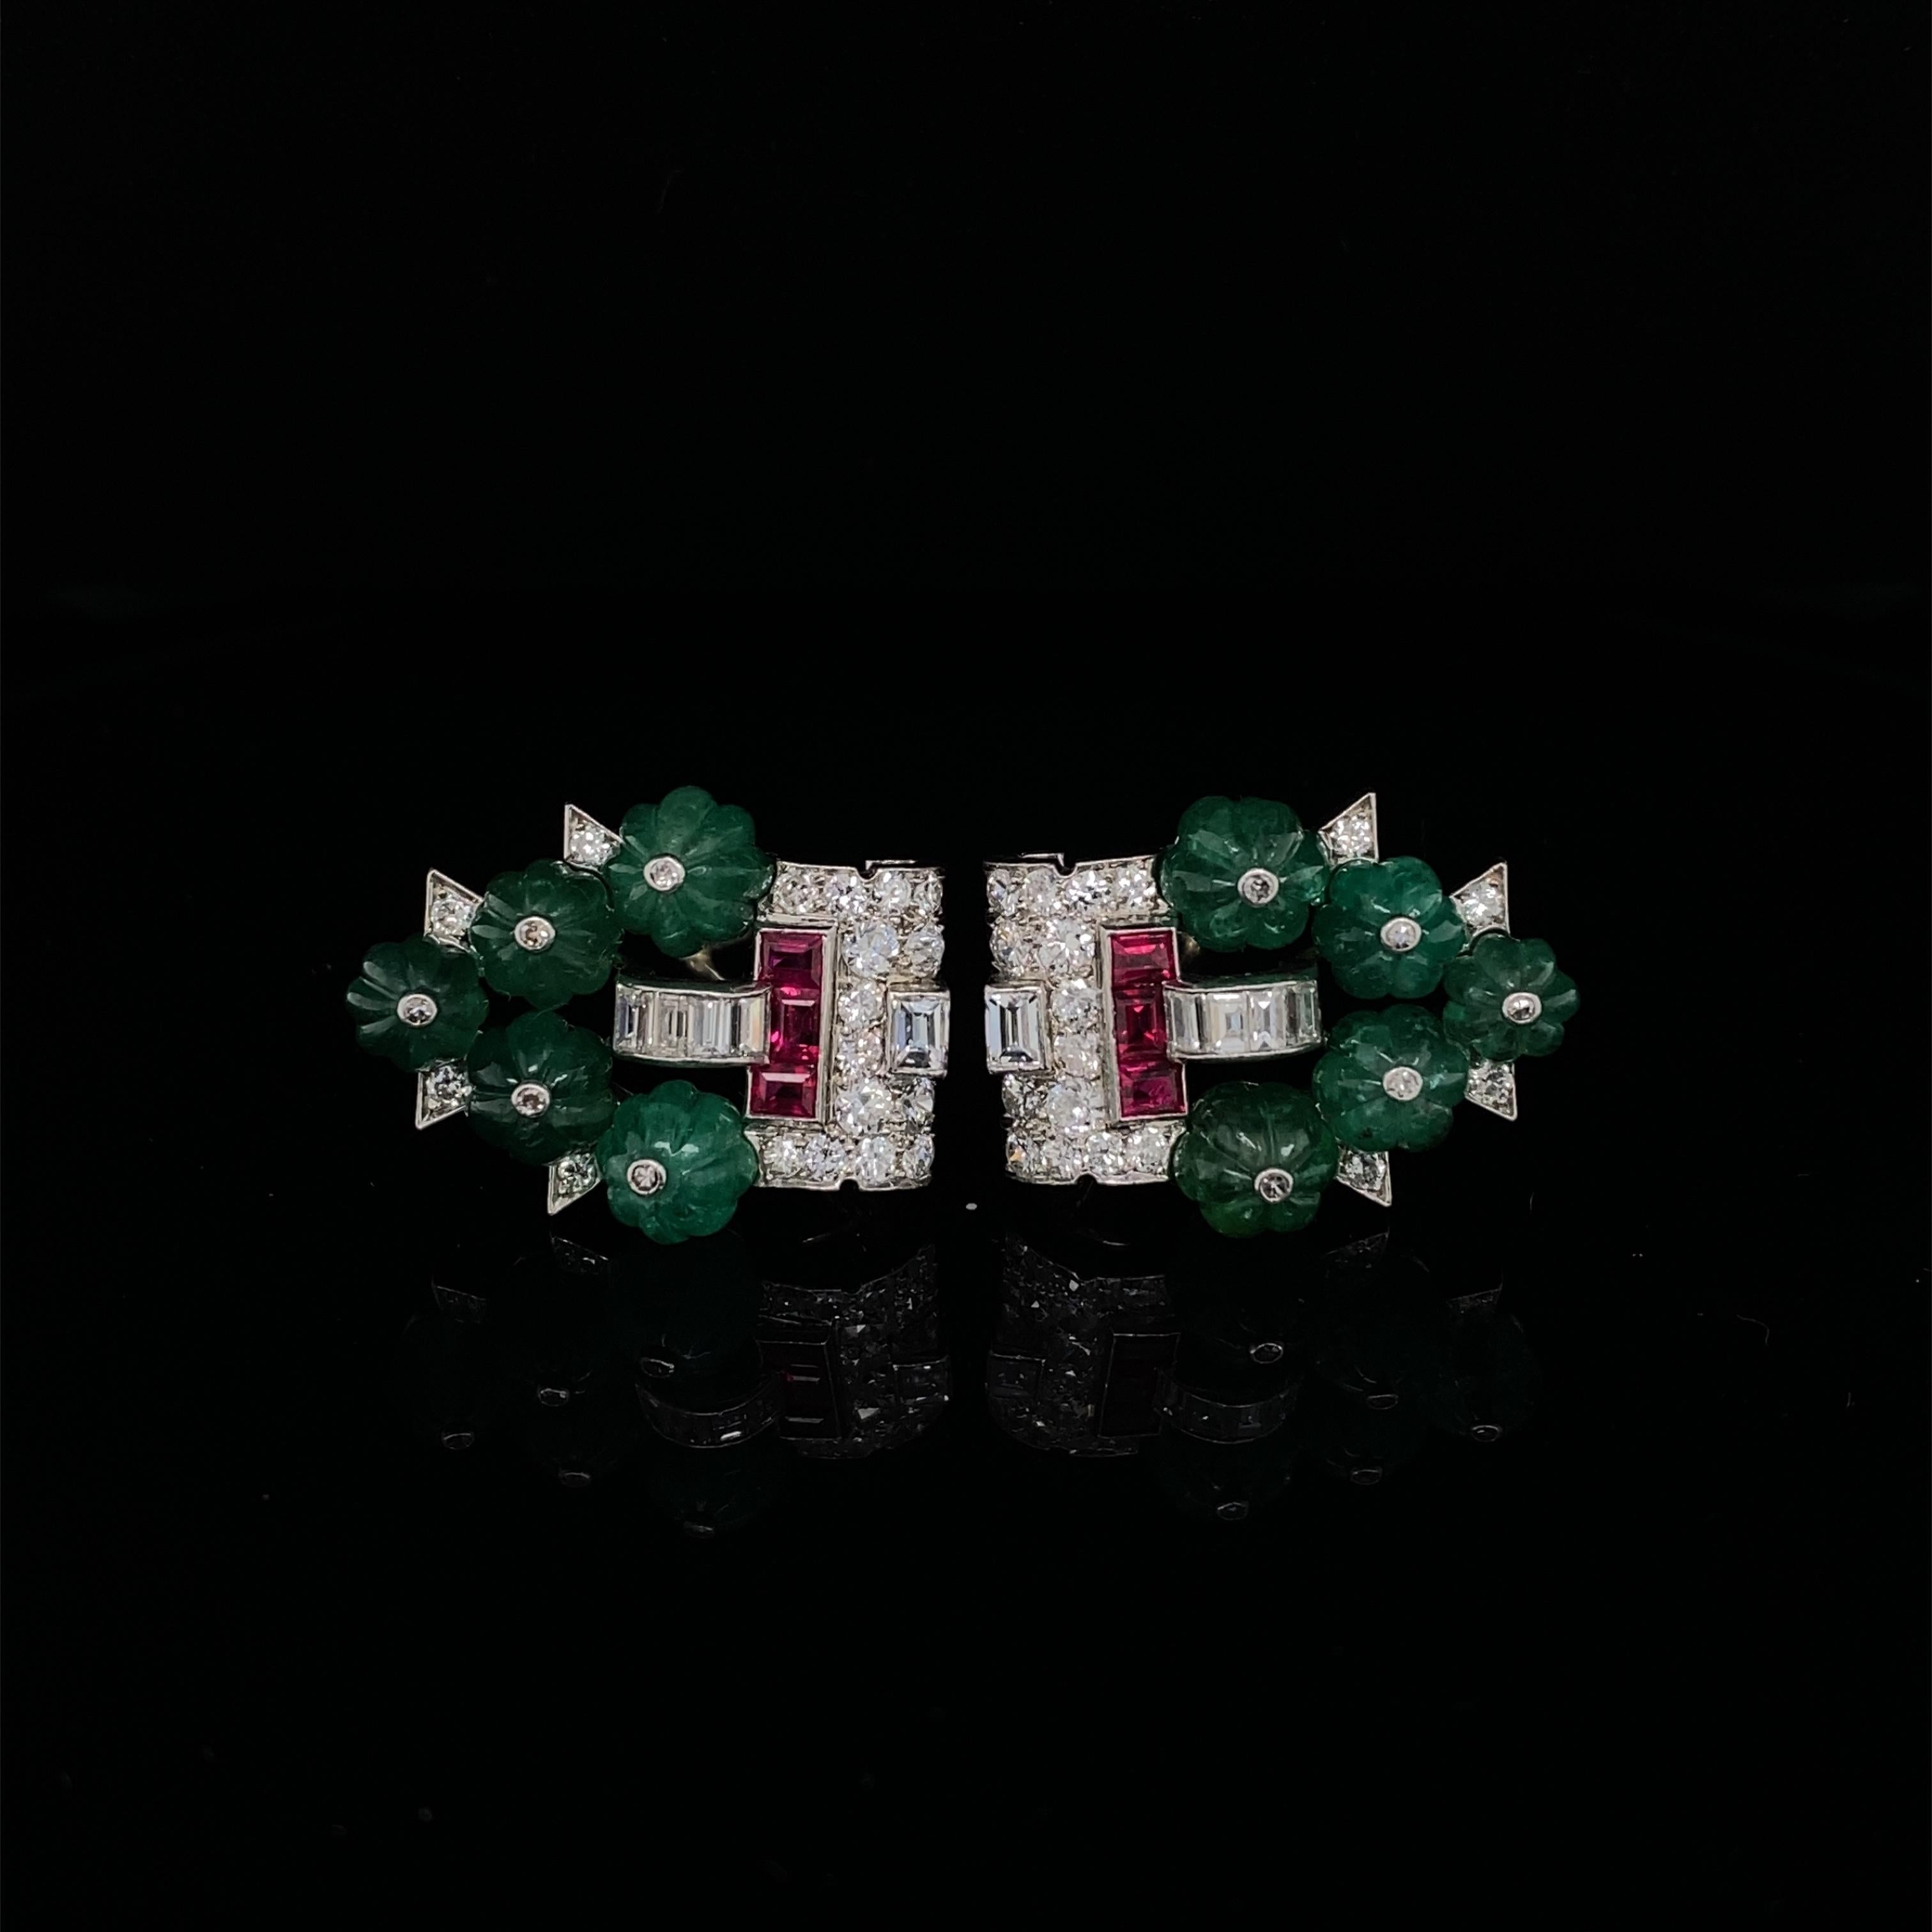 A Cartier New York Art Deco Tutti Frutti double clip brooch.

An exceptional piece, a beautiful example of Cartier's iconic Tutti Frutti design adorned with carved emeralds, baguette and round brilliant cut diamonds with calibré-cut ruby